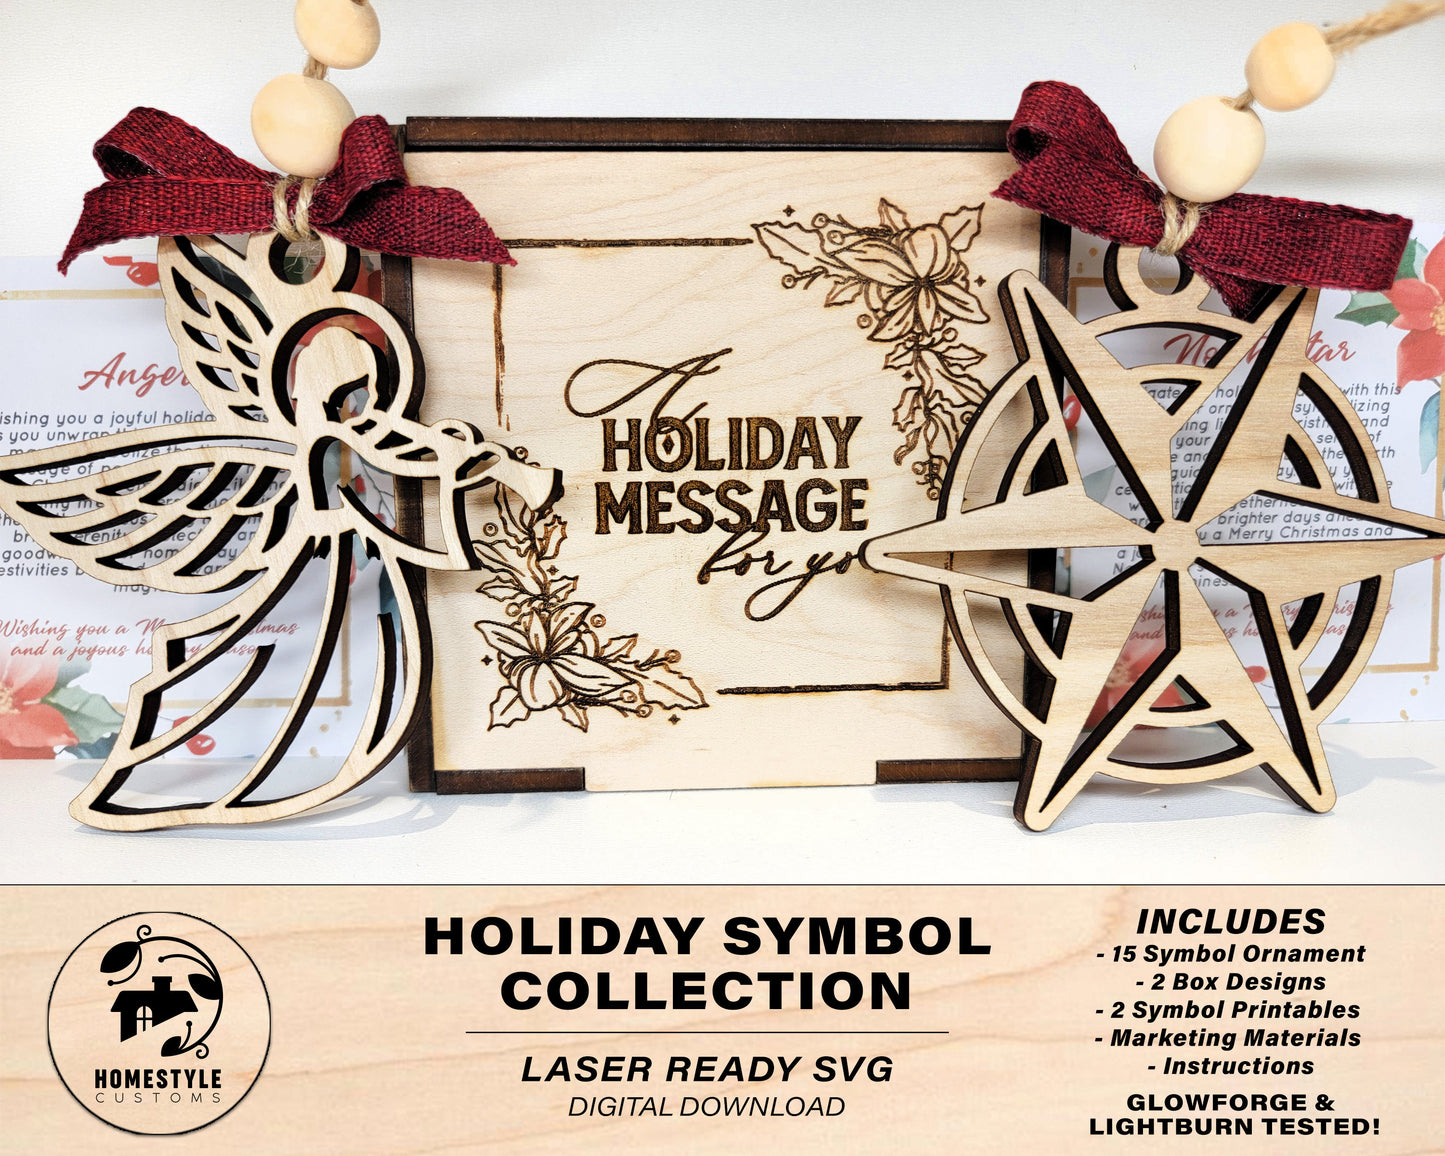 Holiday Symbol Collection - 15 Symbol Ornaments - 15 Prints - 2 Box Designs - SVG, PDF, AI File Download - Glowforge and Lightburn Tested